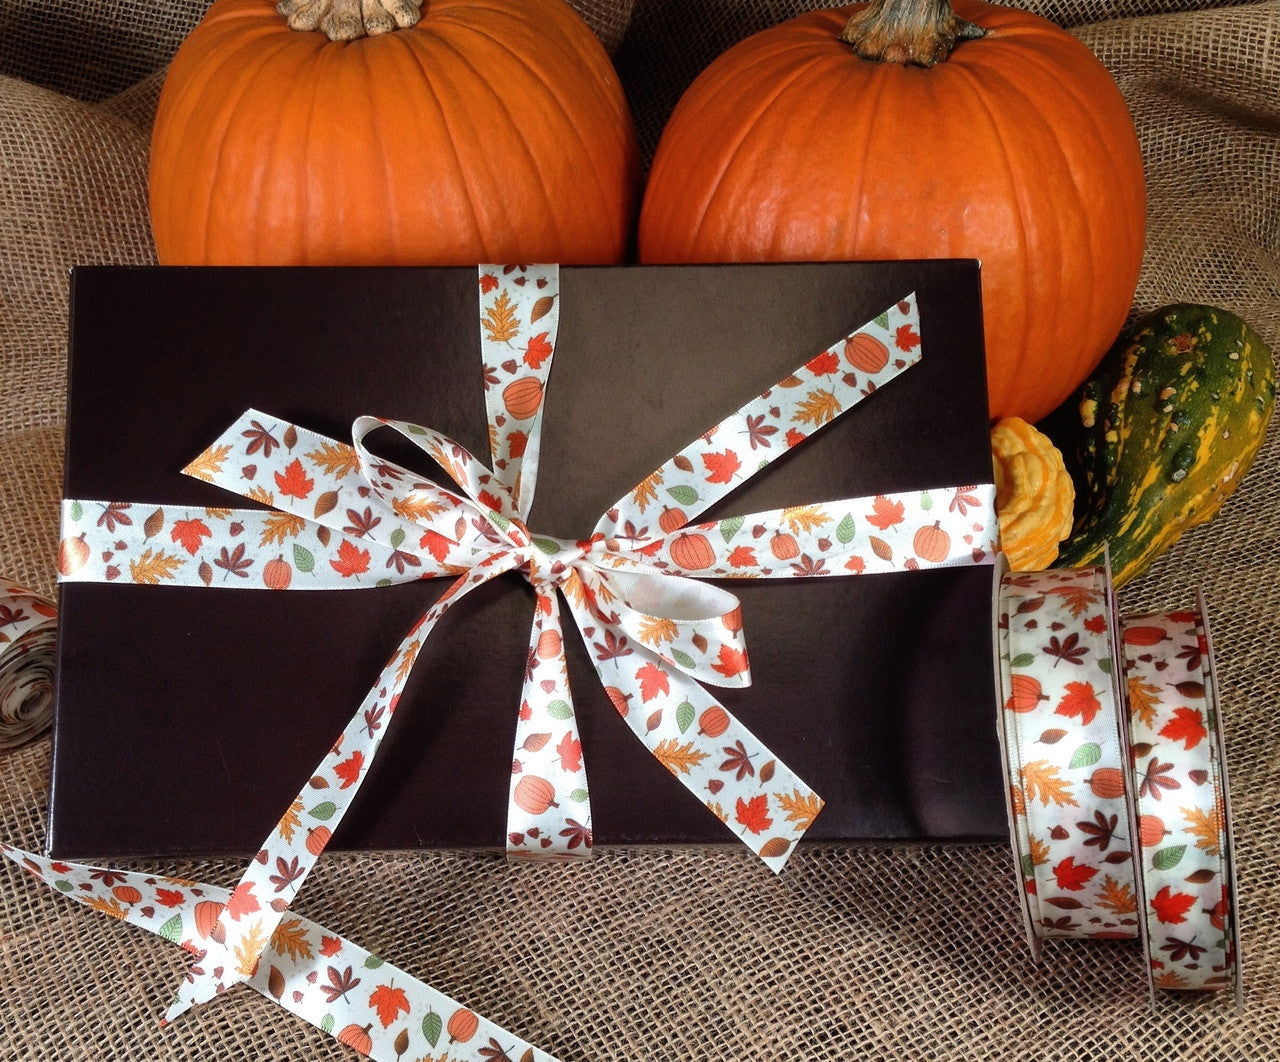 Our Fall leaves and pumpkins on this dark brown box makes for a beautifully presented gift!